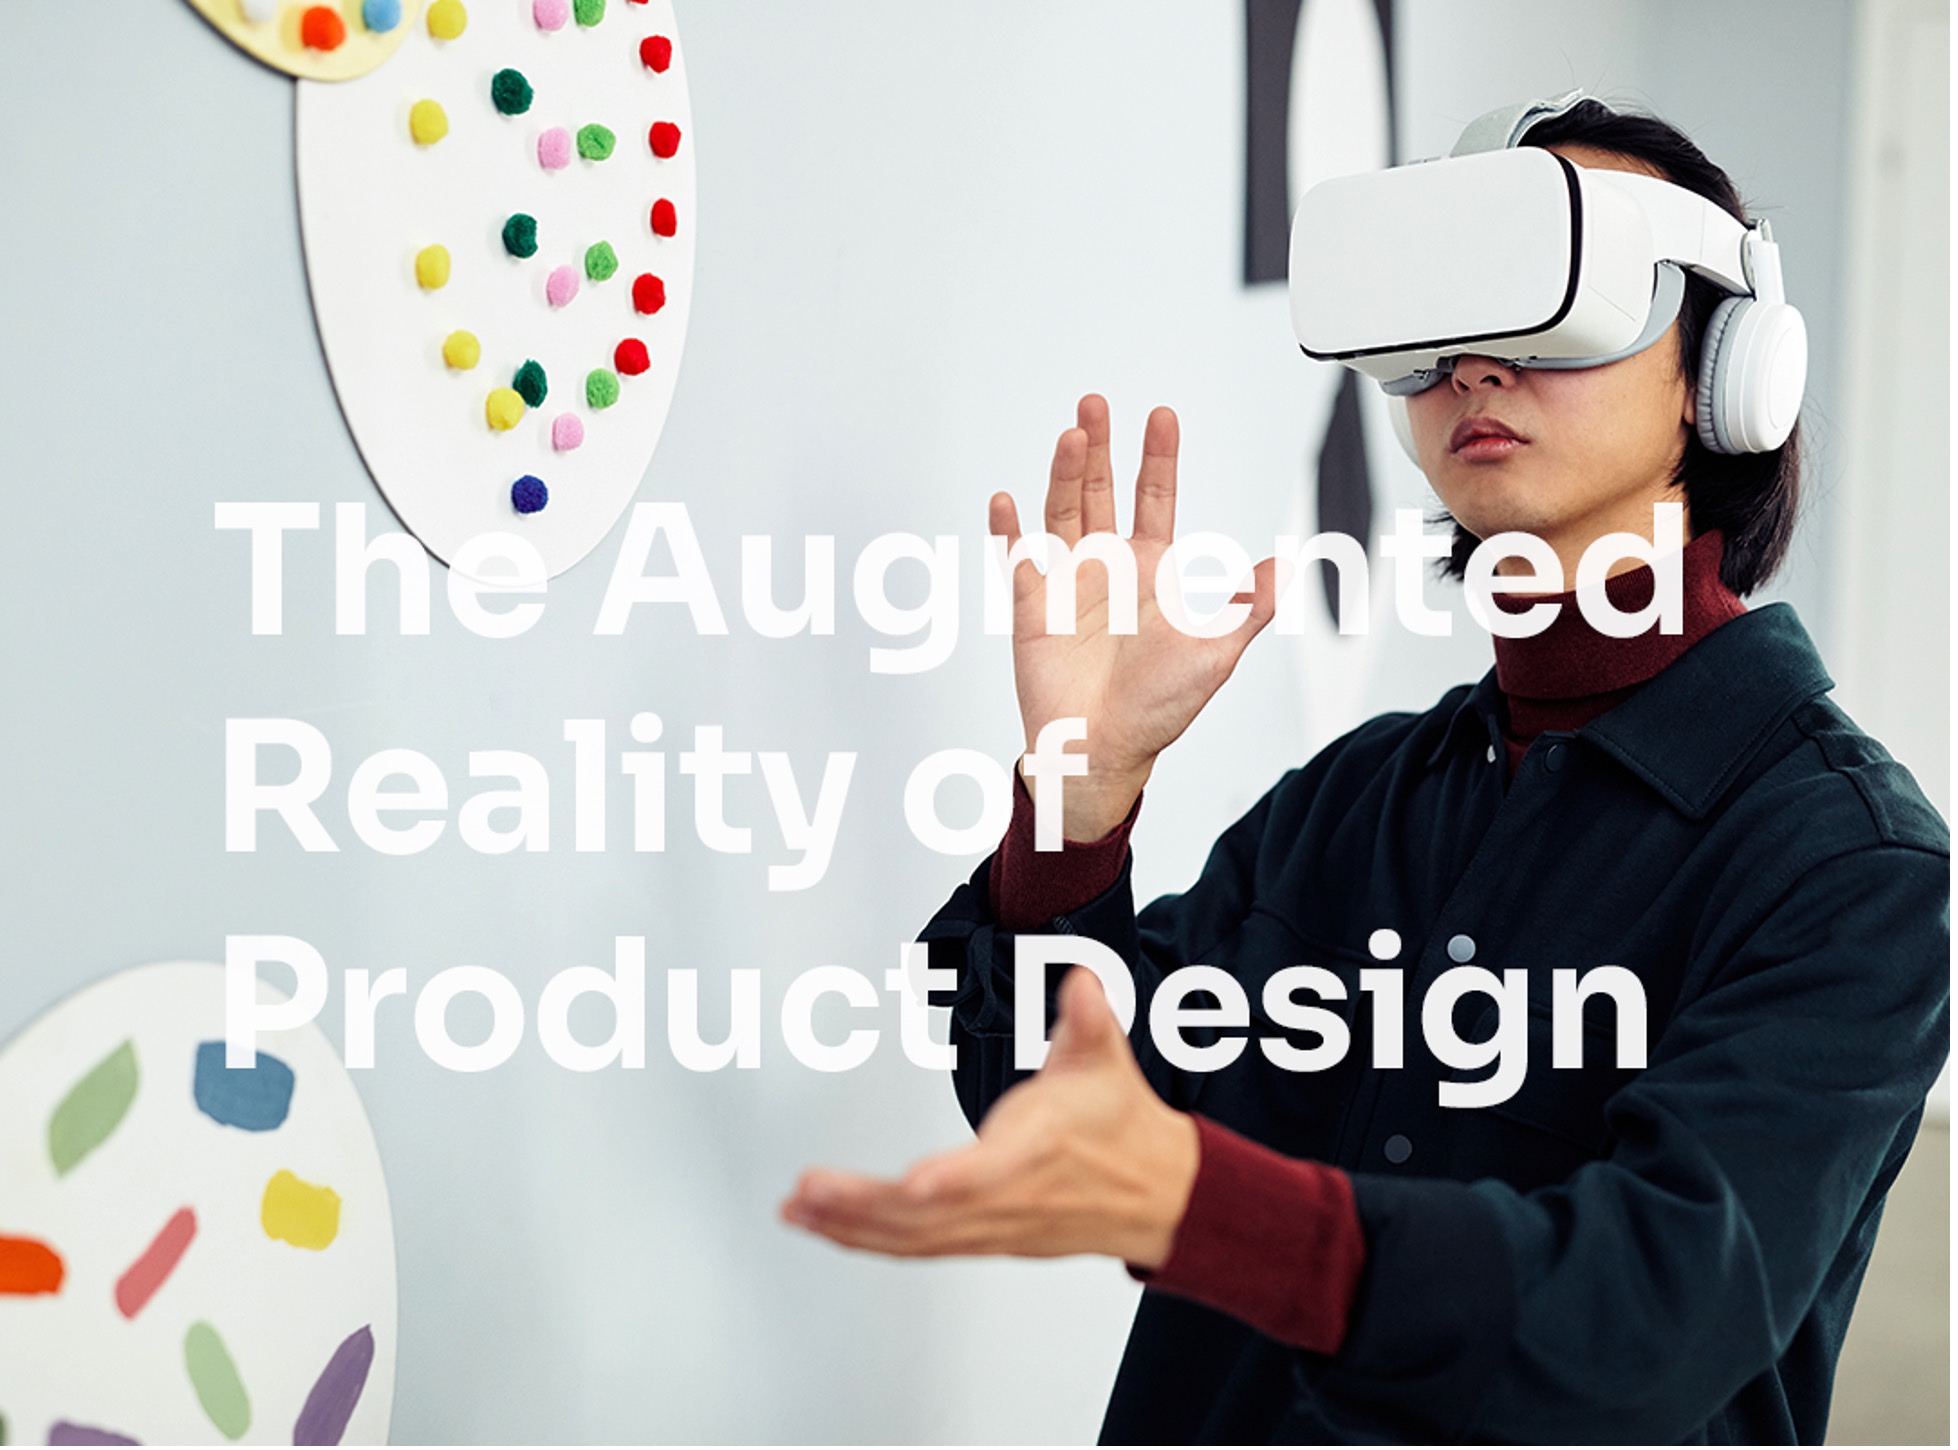 Article exploring the transformative impact of Augmented Reality (AR) in industrial design, discussing its potential, inherent biases, mitigation strategies, and the need for a balanced approach towards its adoption.